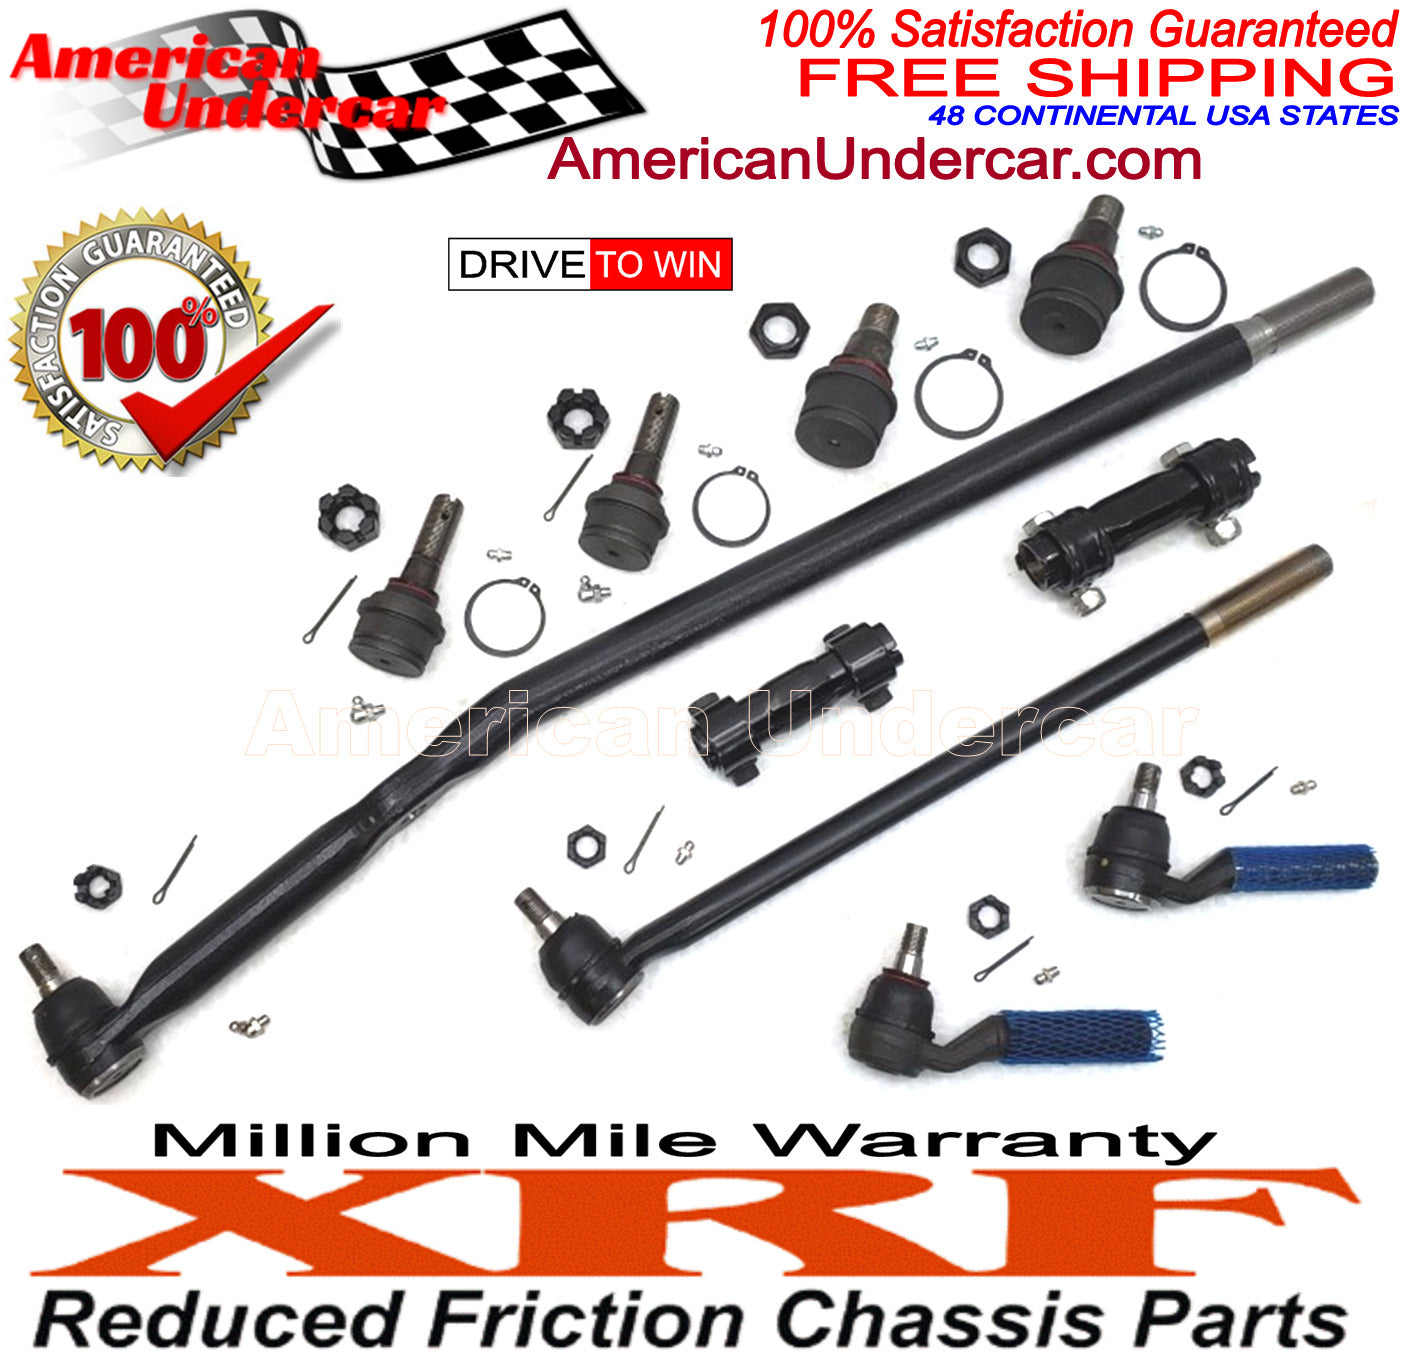 XRF Ball Joint Tie Rod Drag Link Sleeve Steering Kit for 1995-1996 Ford F250 4x4, 3850lb Axle